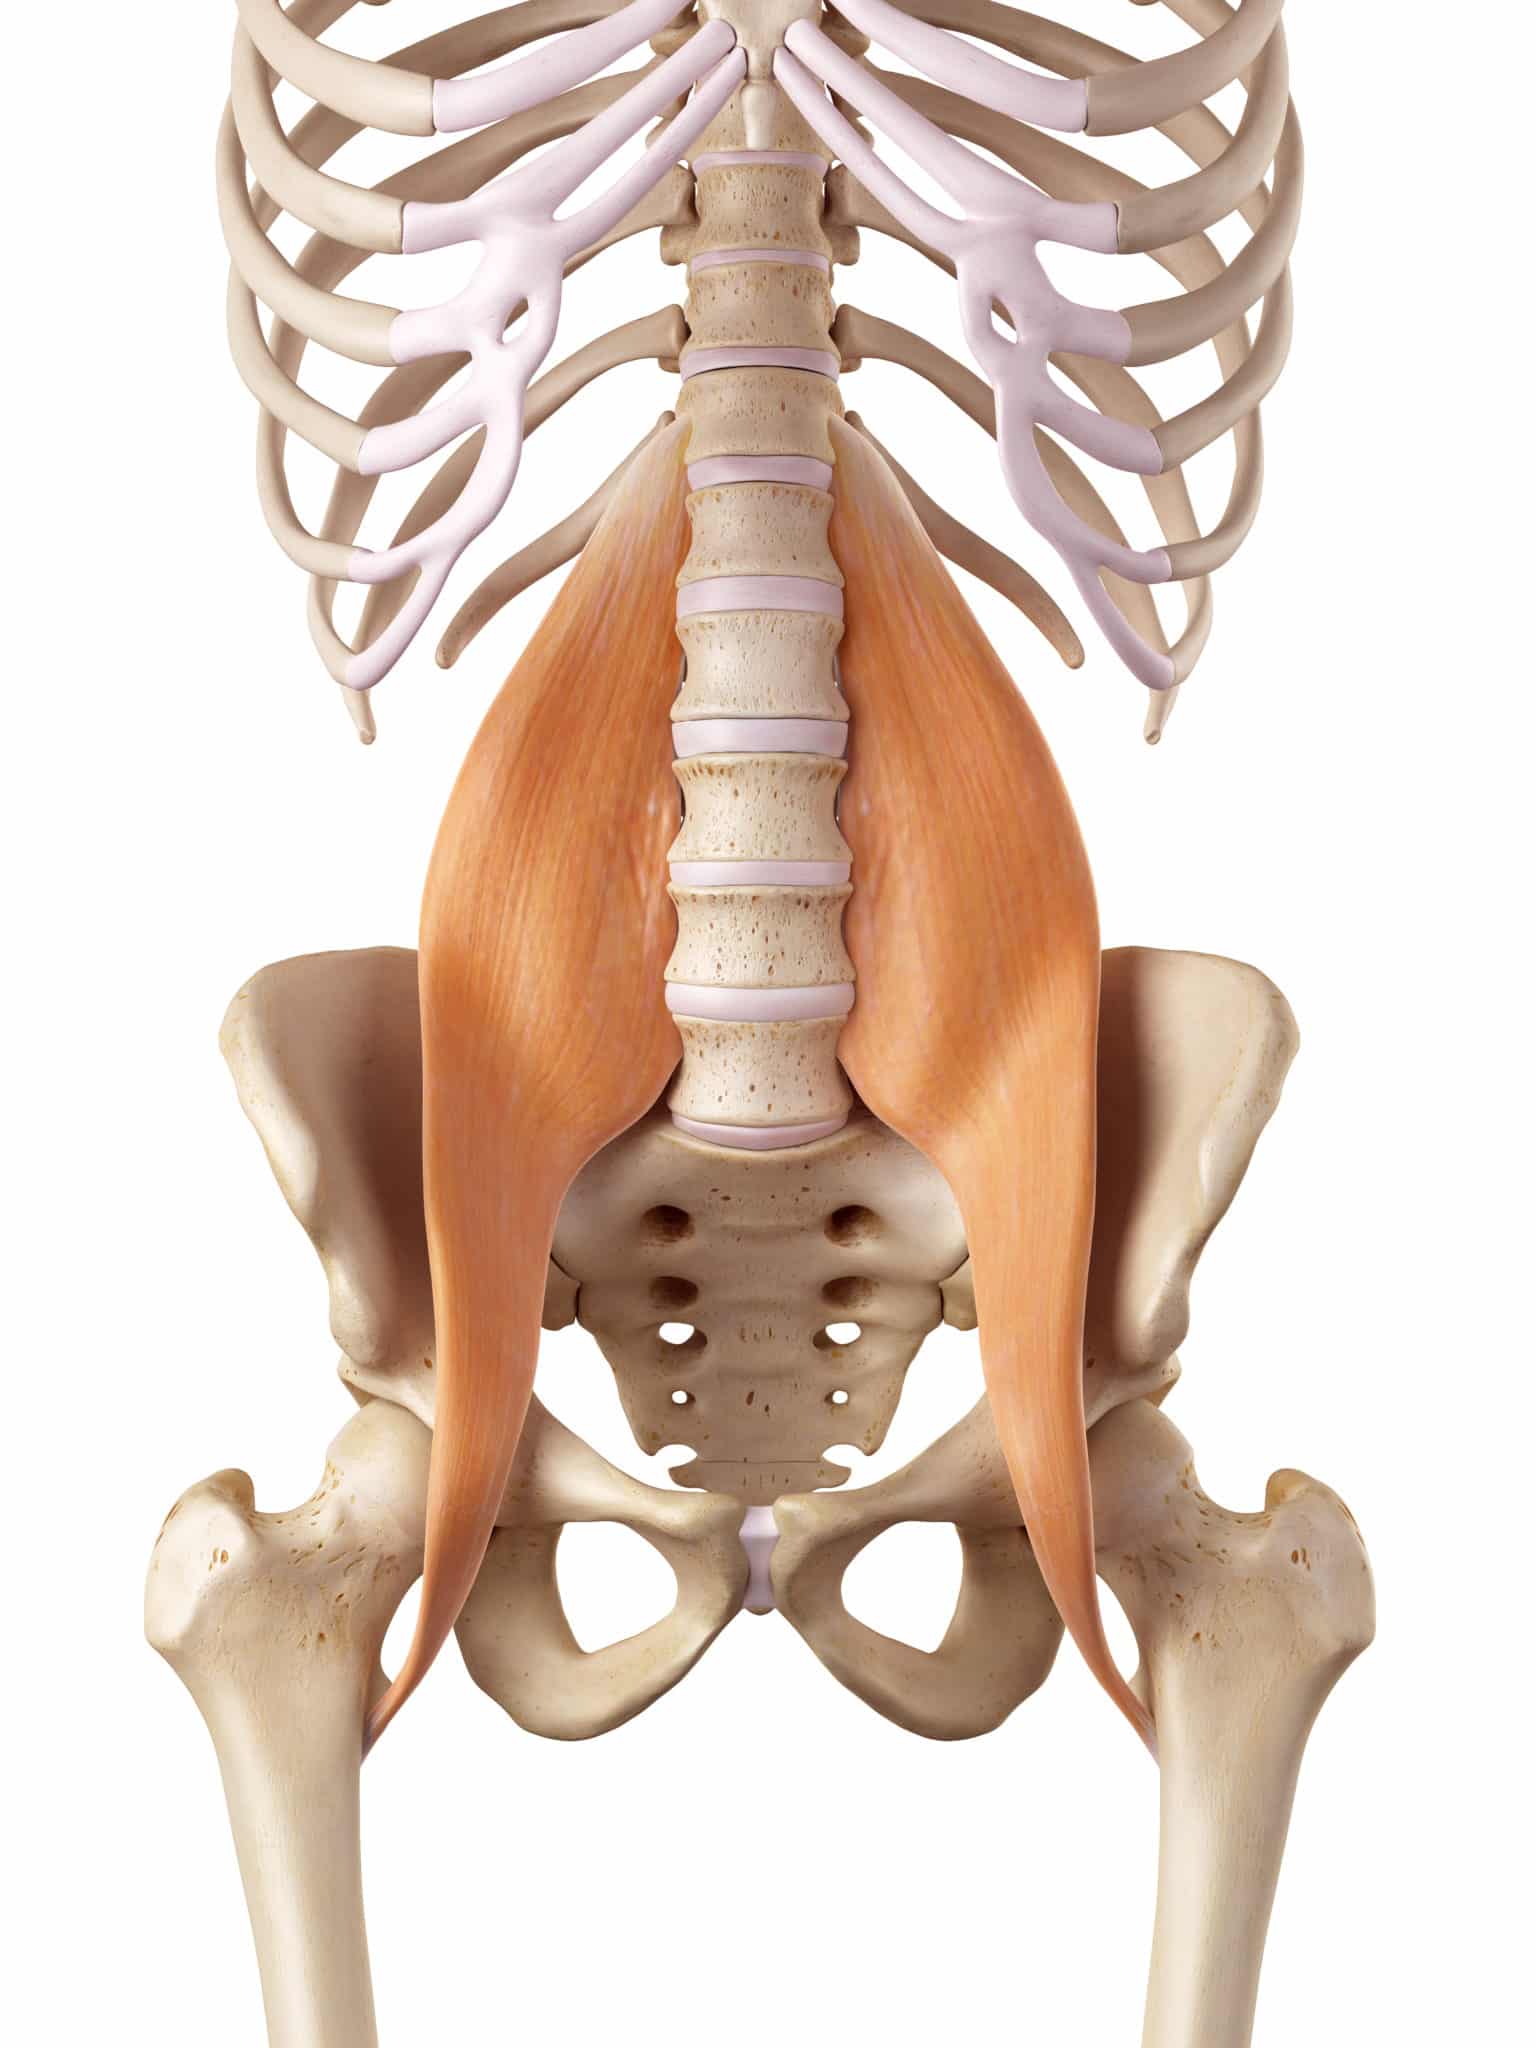 Diagram of the psoas muscle